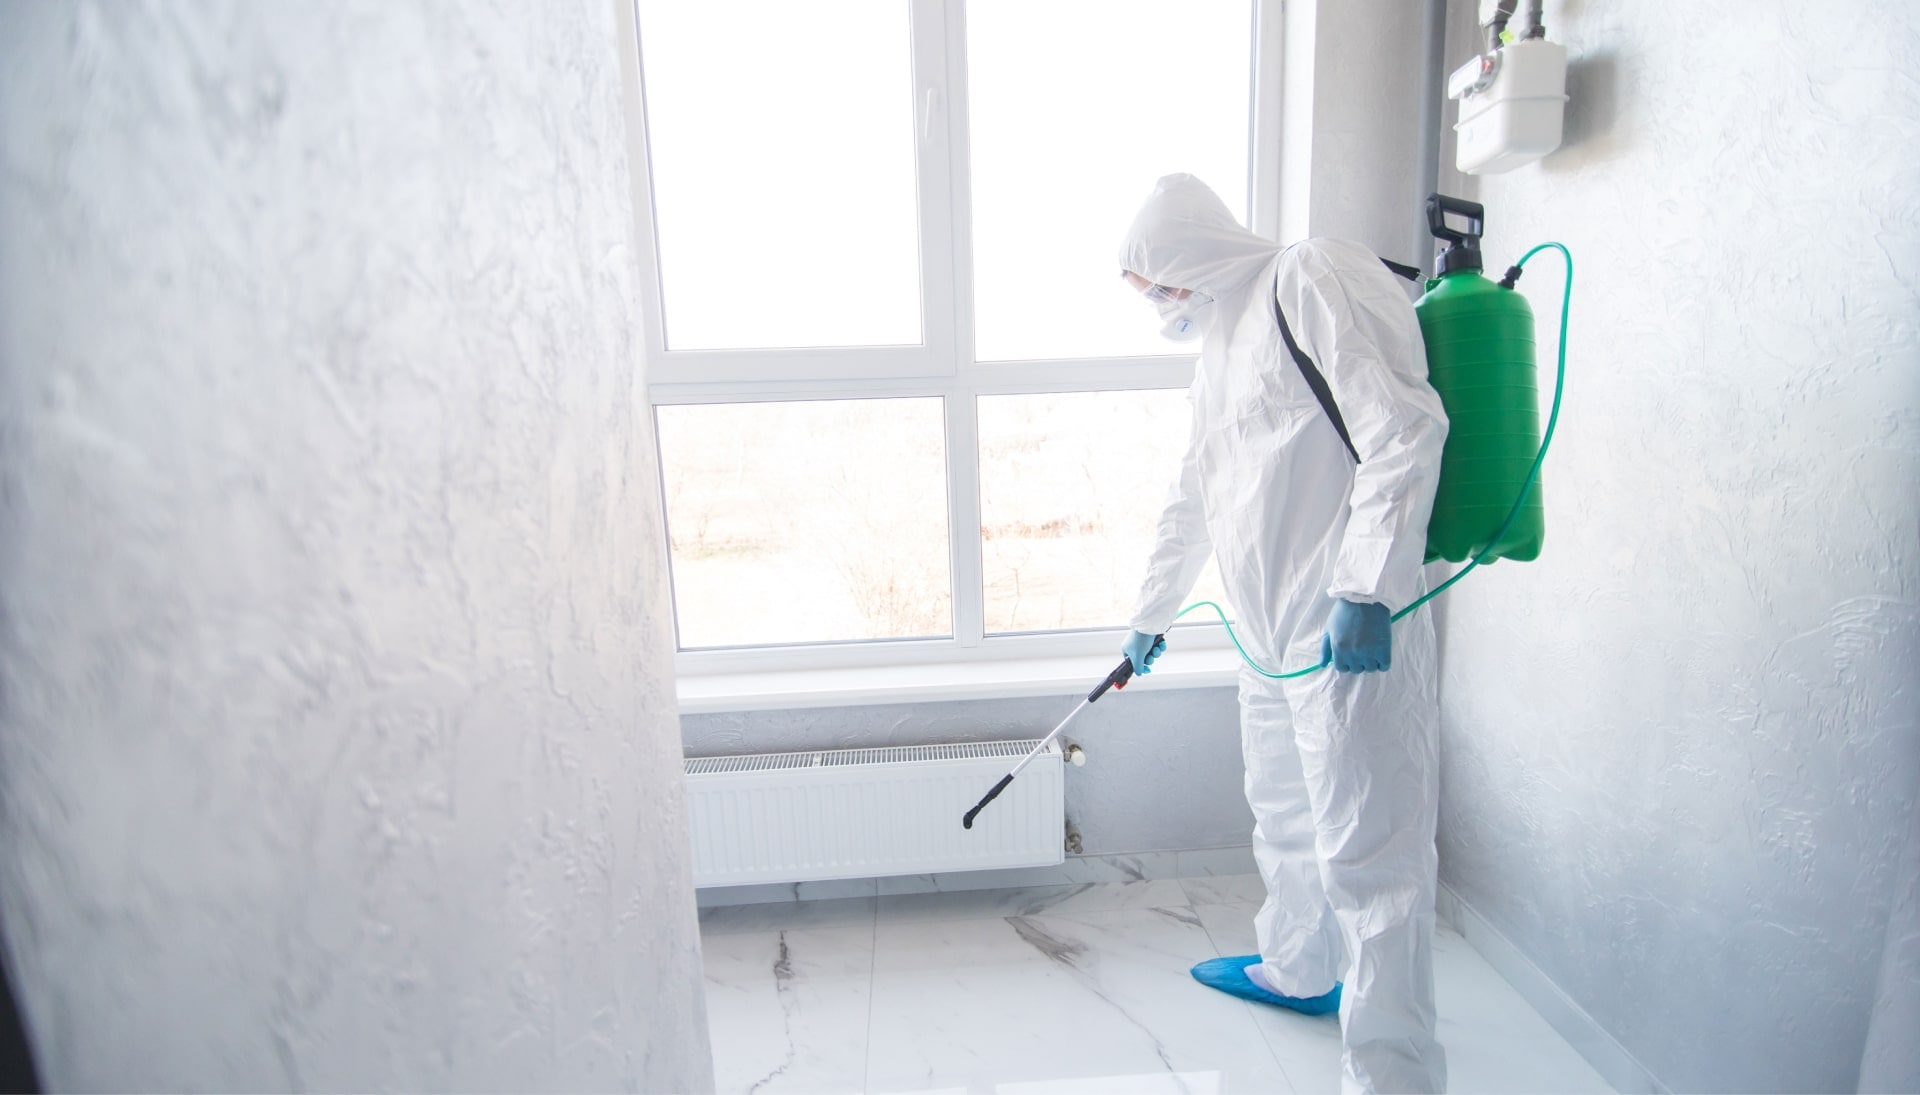 We provide the highest-quality mold inspection, testing, and removal services in the Greensboro, North Carolina area.